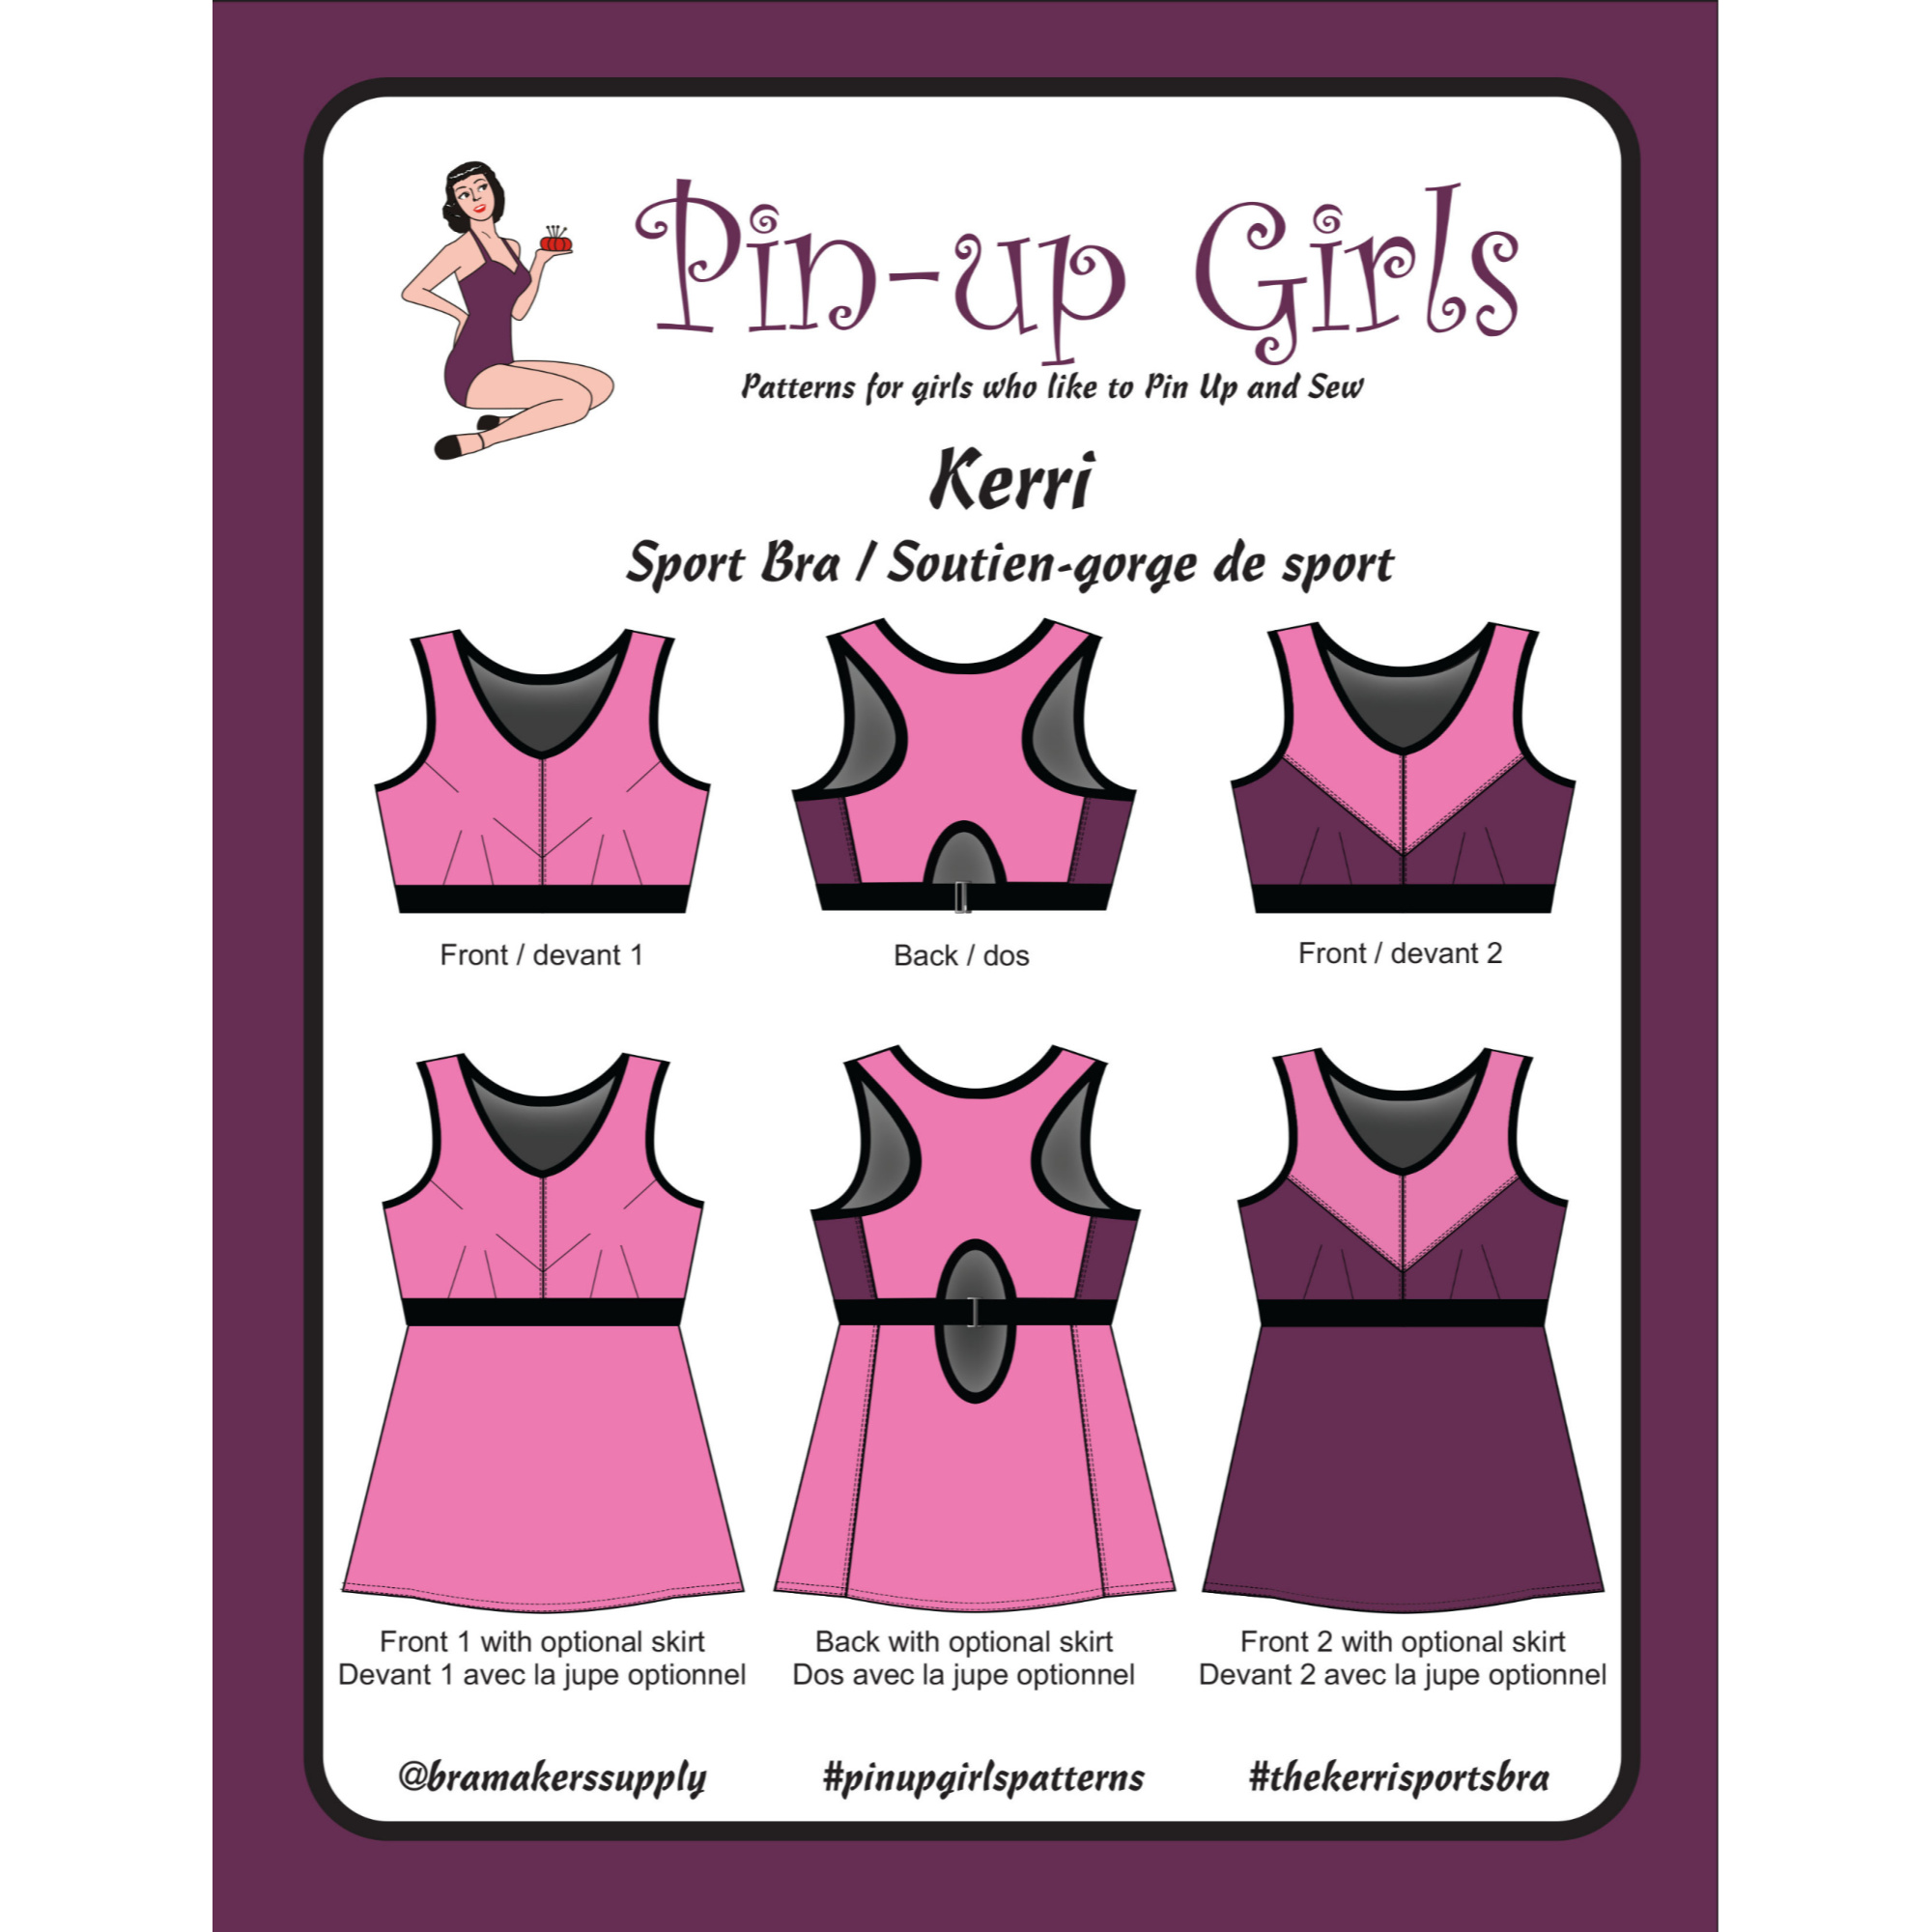 Pin-Up Girls: Kerri No-bounce Sport Bra and Top from